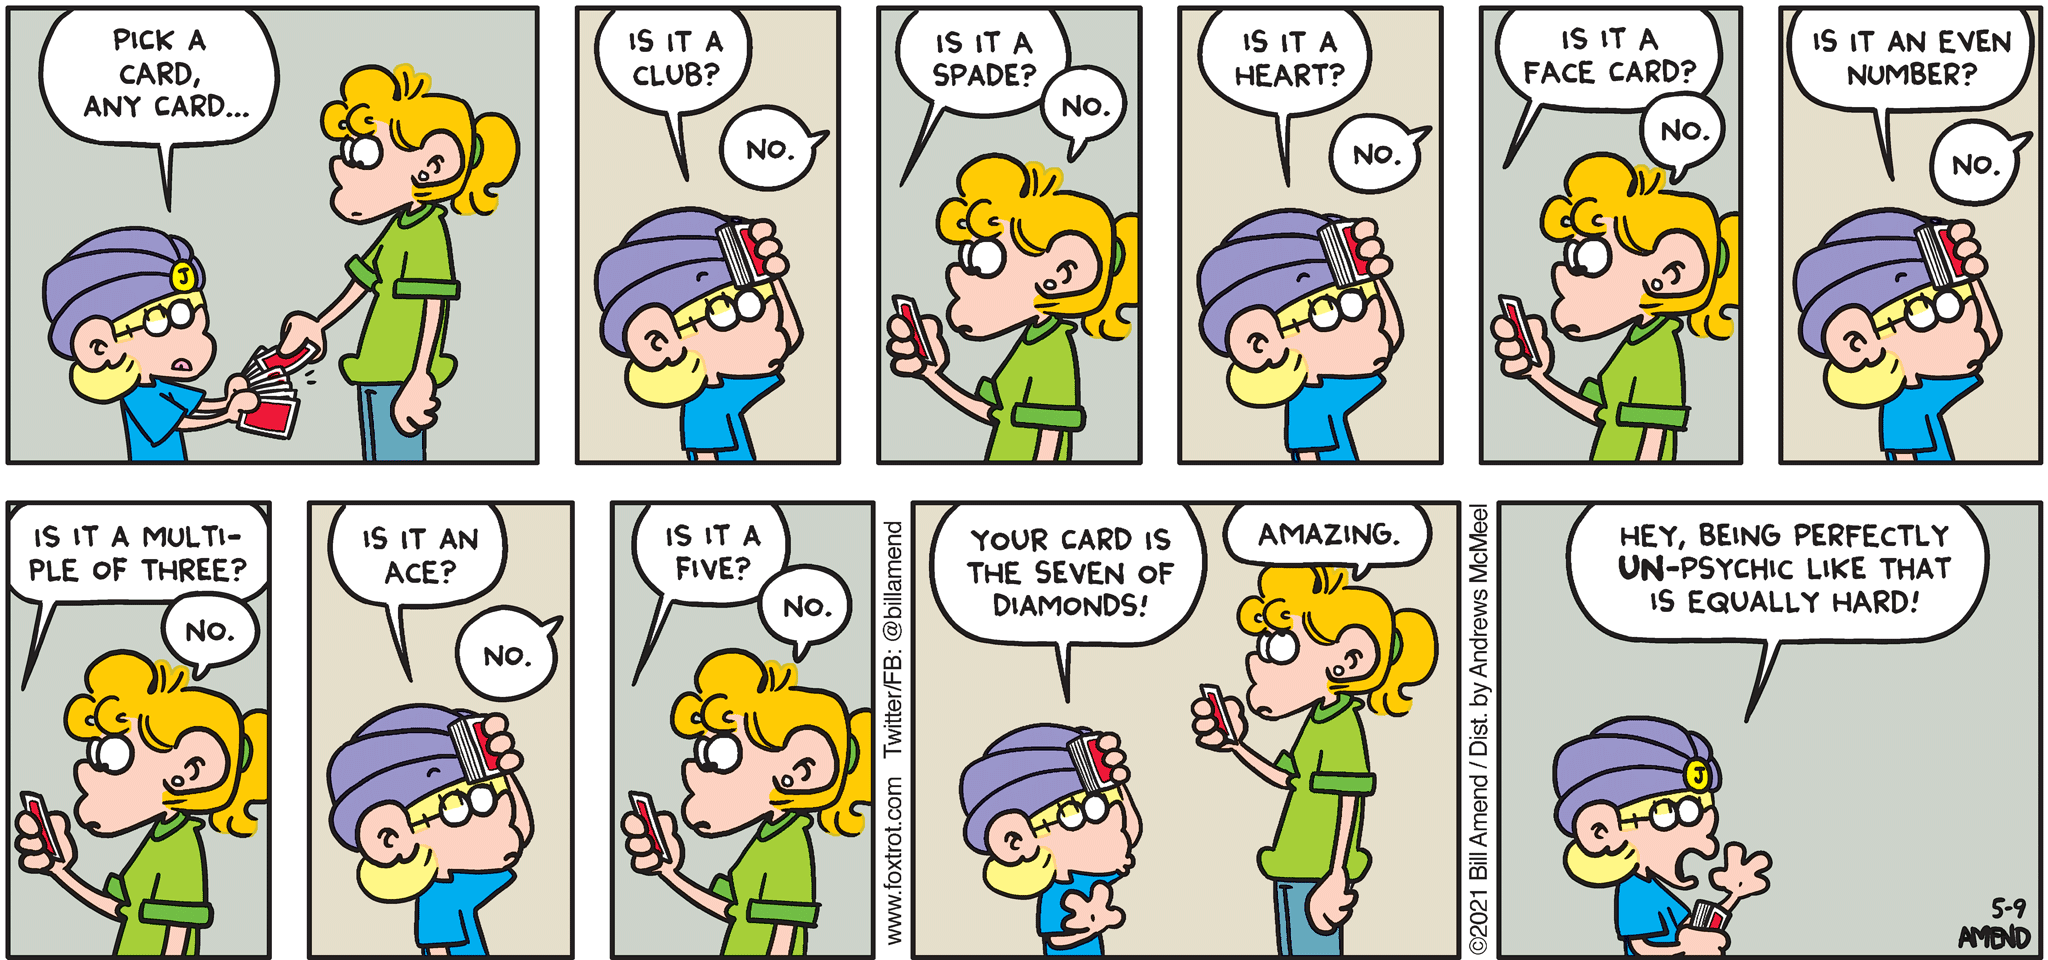 FoxTrot comic strip by Bill Amend - "Unpsychic" published May 9, 2021 - Jason Fox: Pick a card, any card... Is it a club? Paige Fox: No. Jason Fox: Is it a spade? Paige Fox: No. Jason Fox: Is it a heart? Paige Fox: No. Jason Fox: Is it a face card. Paige Fox: No. Jason Fox: Is it an even number? Paige Fox: No. Jason Fox: Is it a multiple of three? Jason Fox: No. Jason Fox: Is it an ace? Paige Fox: No. Jason Fox: Is it a five? Paige Fox: No. Jason Fox: Your card is the seven of diamonds. Paige Fox: Amazing. Jason Fox: Hey, being perfectly un-psychic like that is equally hard!